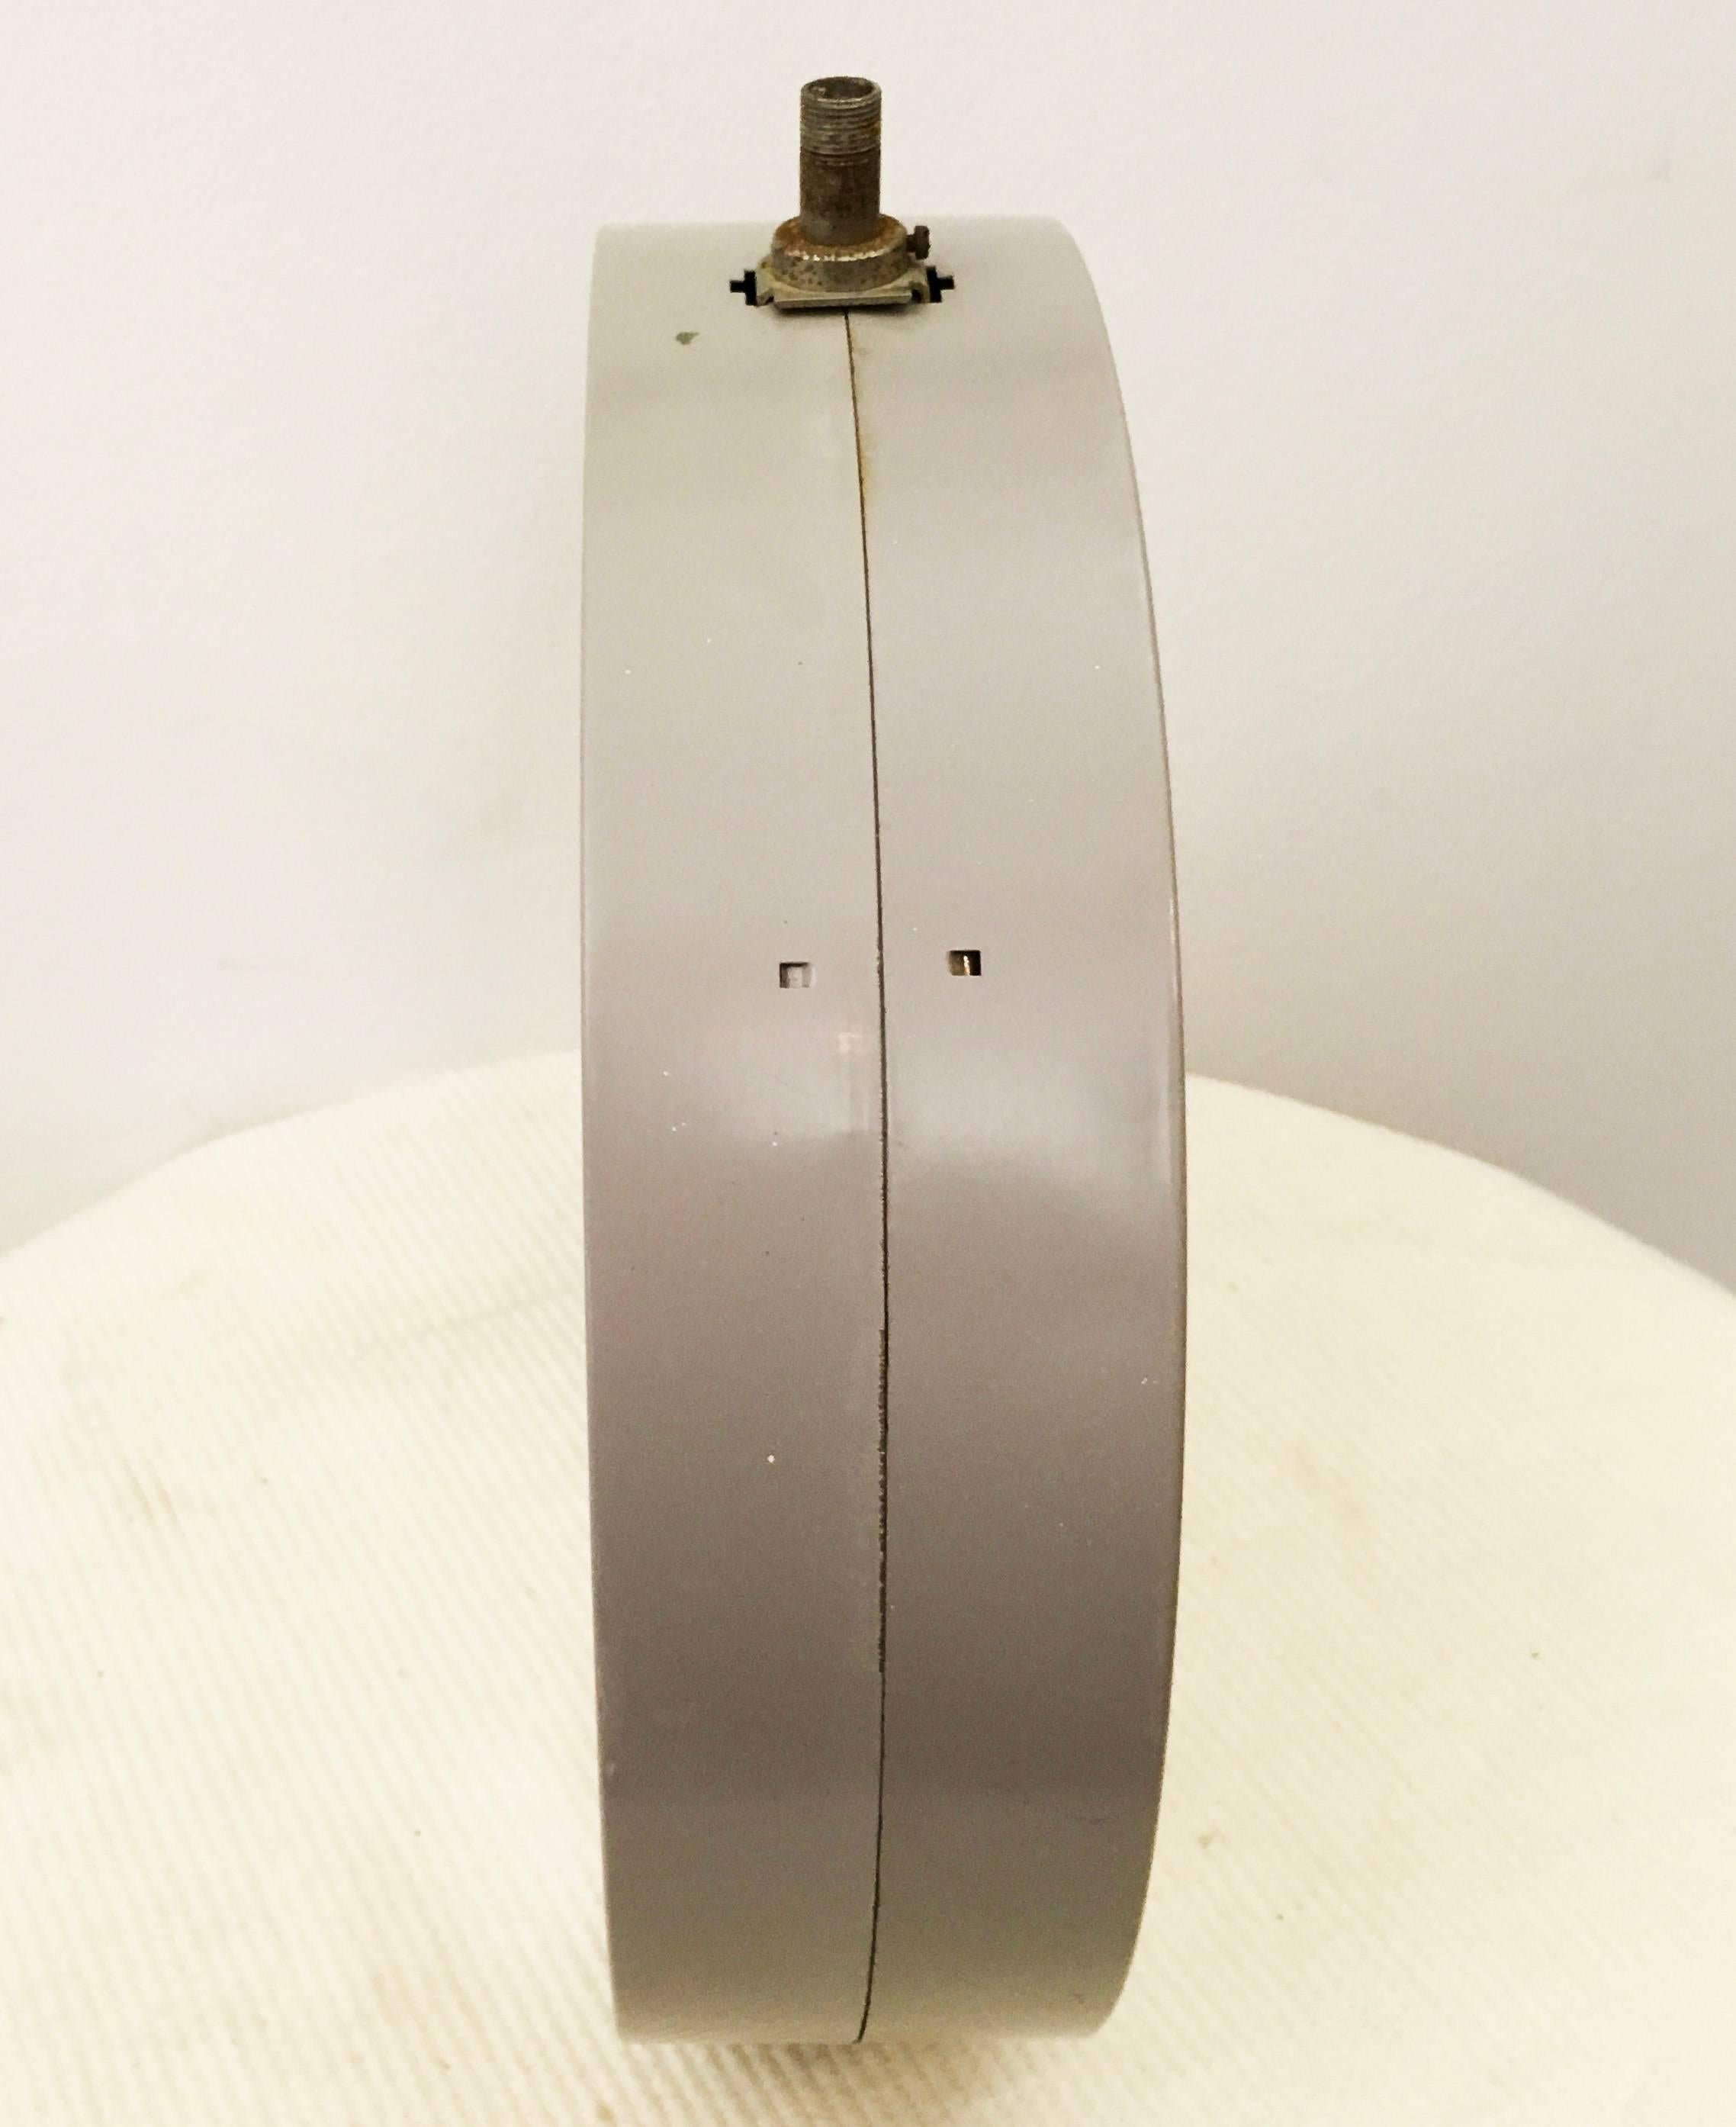 Large German station clock by Siemens & Halske from the early 1950s.
Formerly as a slave clock with mechanical movement, it is now fitted with a modern quartz movement with a battery.
Steel lacquered frame with glass on both sides.
This clock can